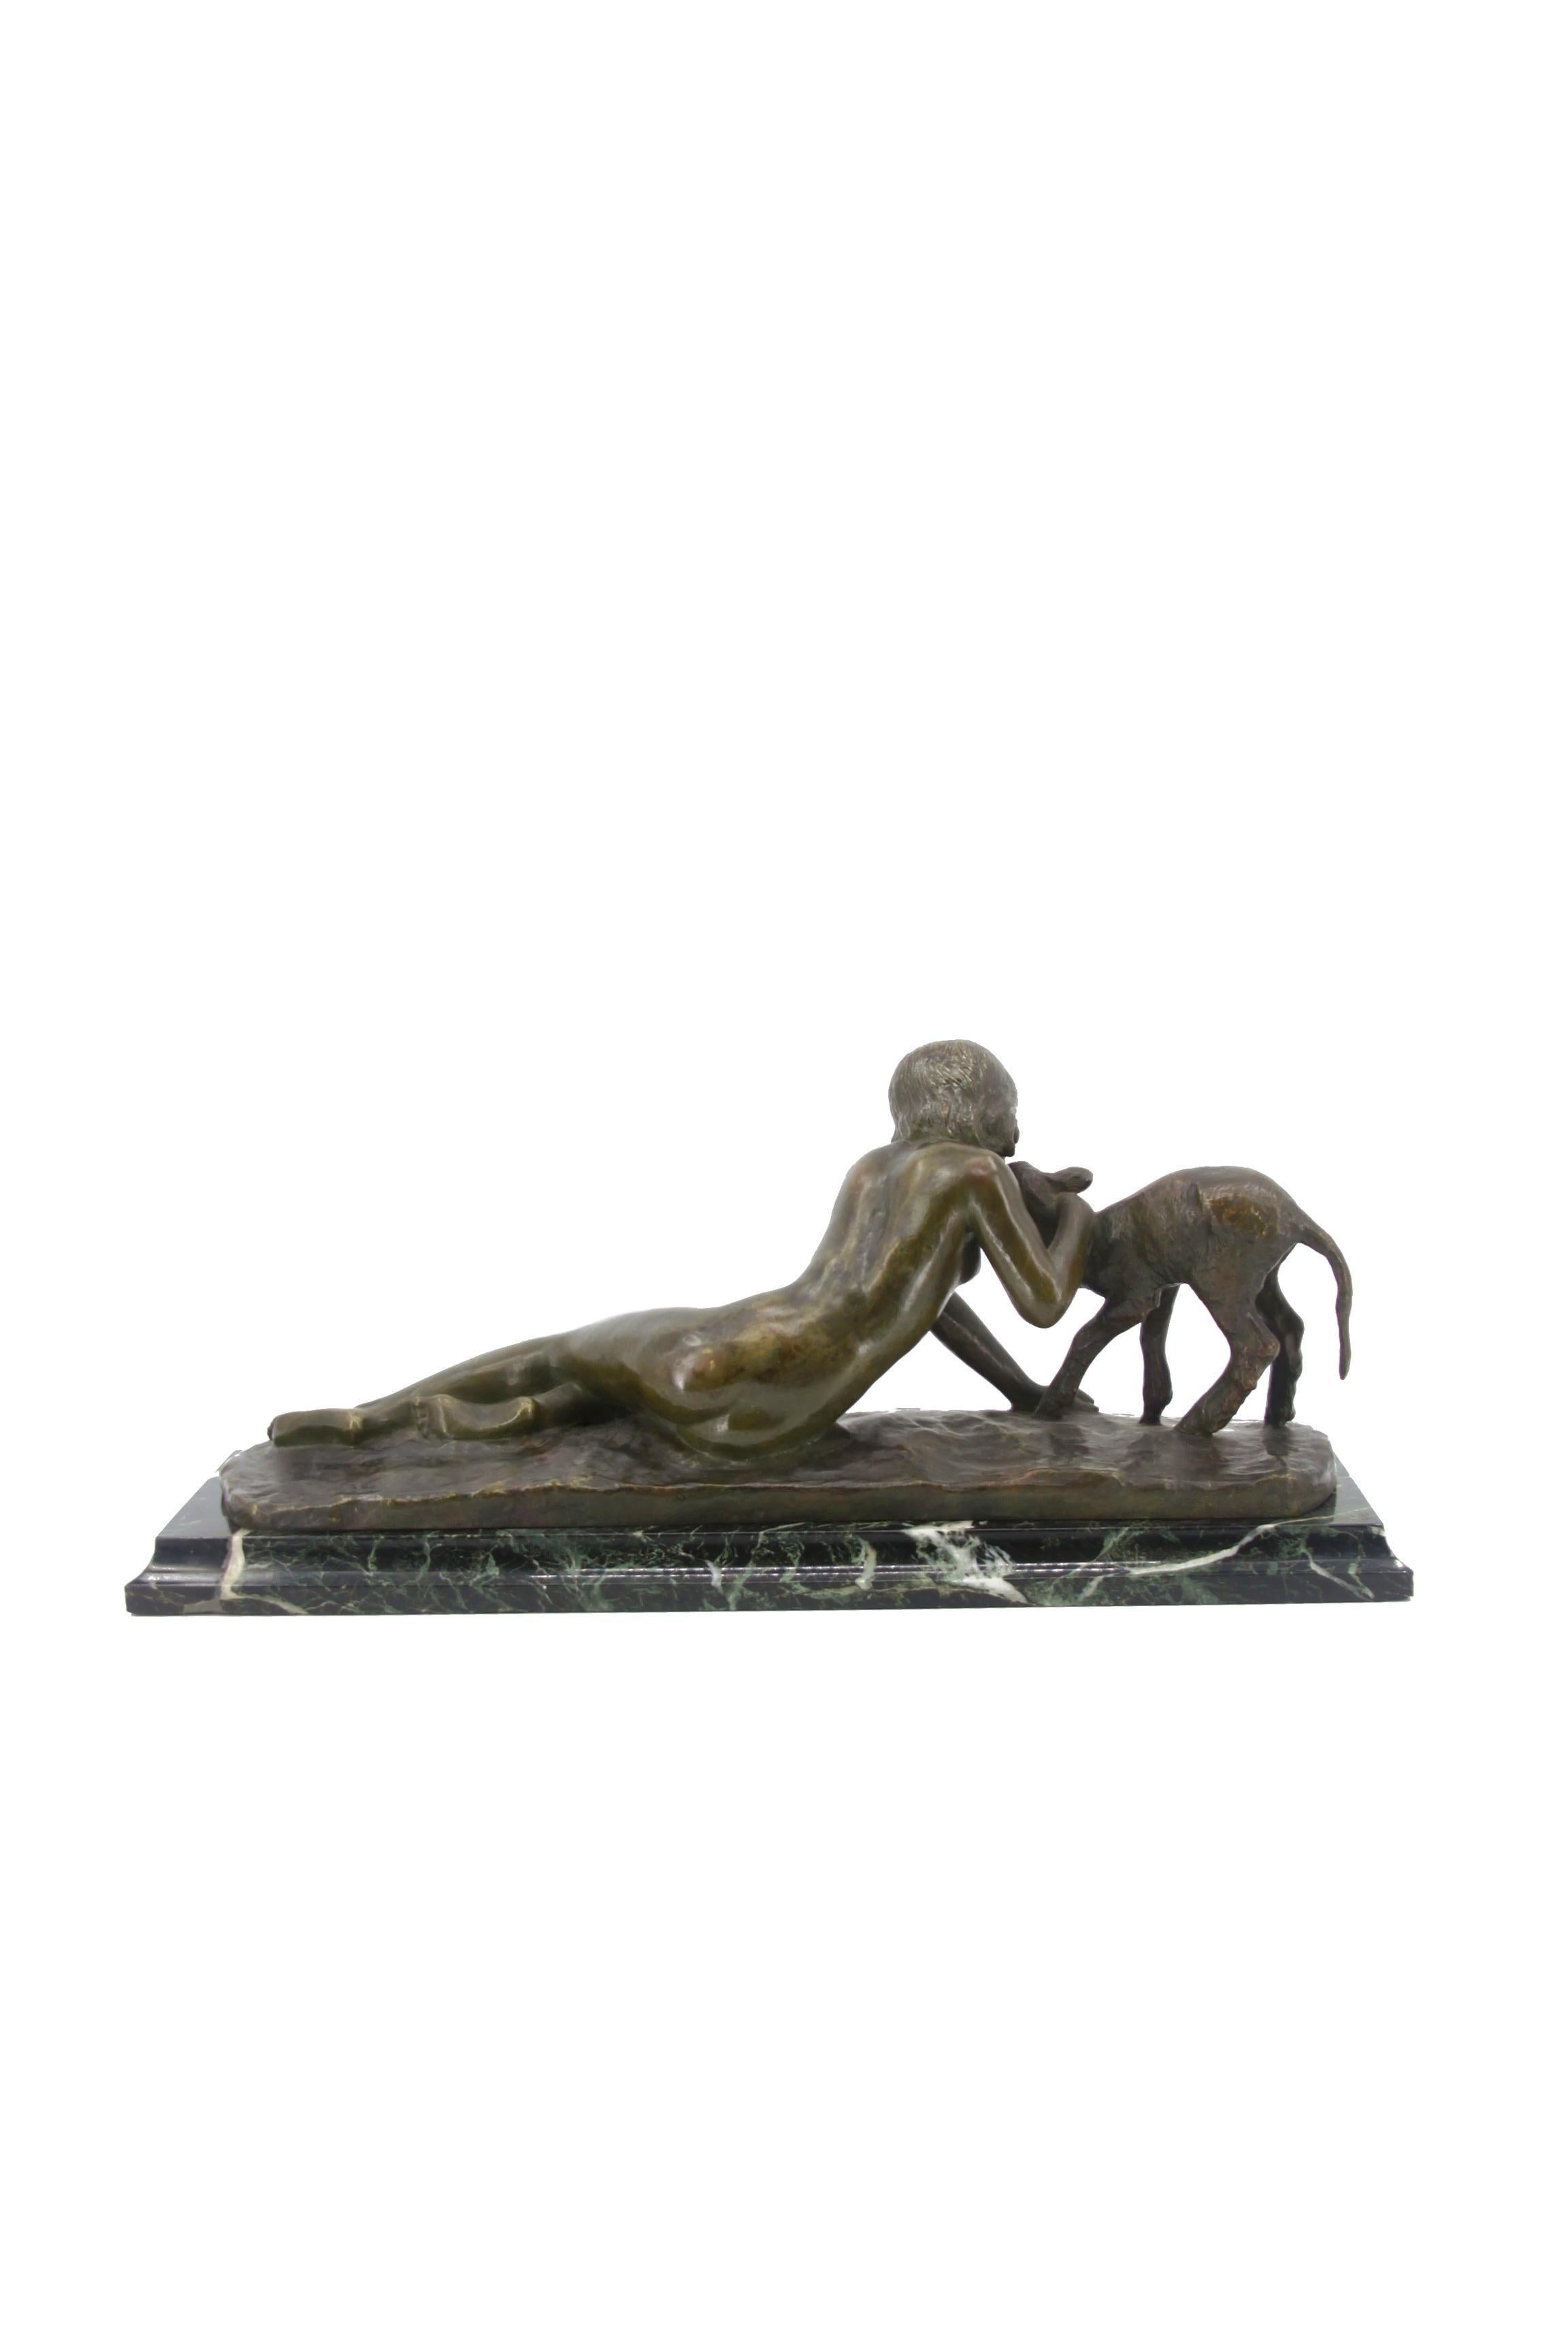 Bronze sculpture with green and dark brown patina image of a young woman embracing a lamb, signed by Ary Bitter, on a green black marble stand.

Ary Bitter (1883–1973) was a French artist, best known for his animal sculptures. He was a designer,